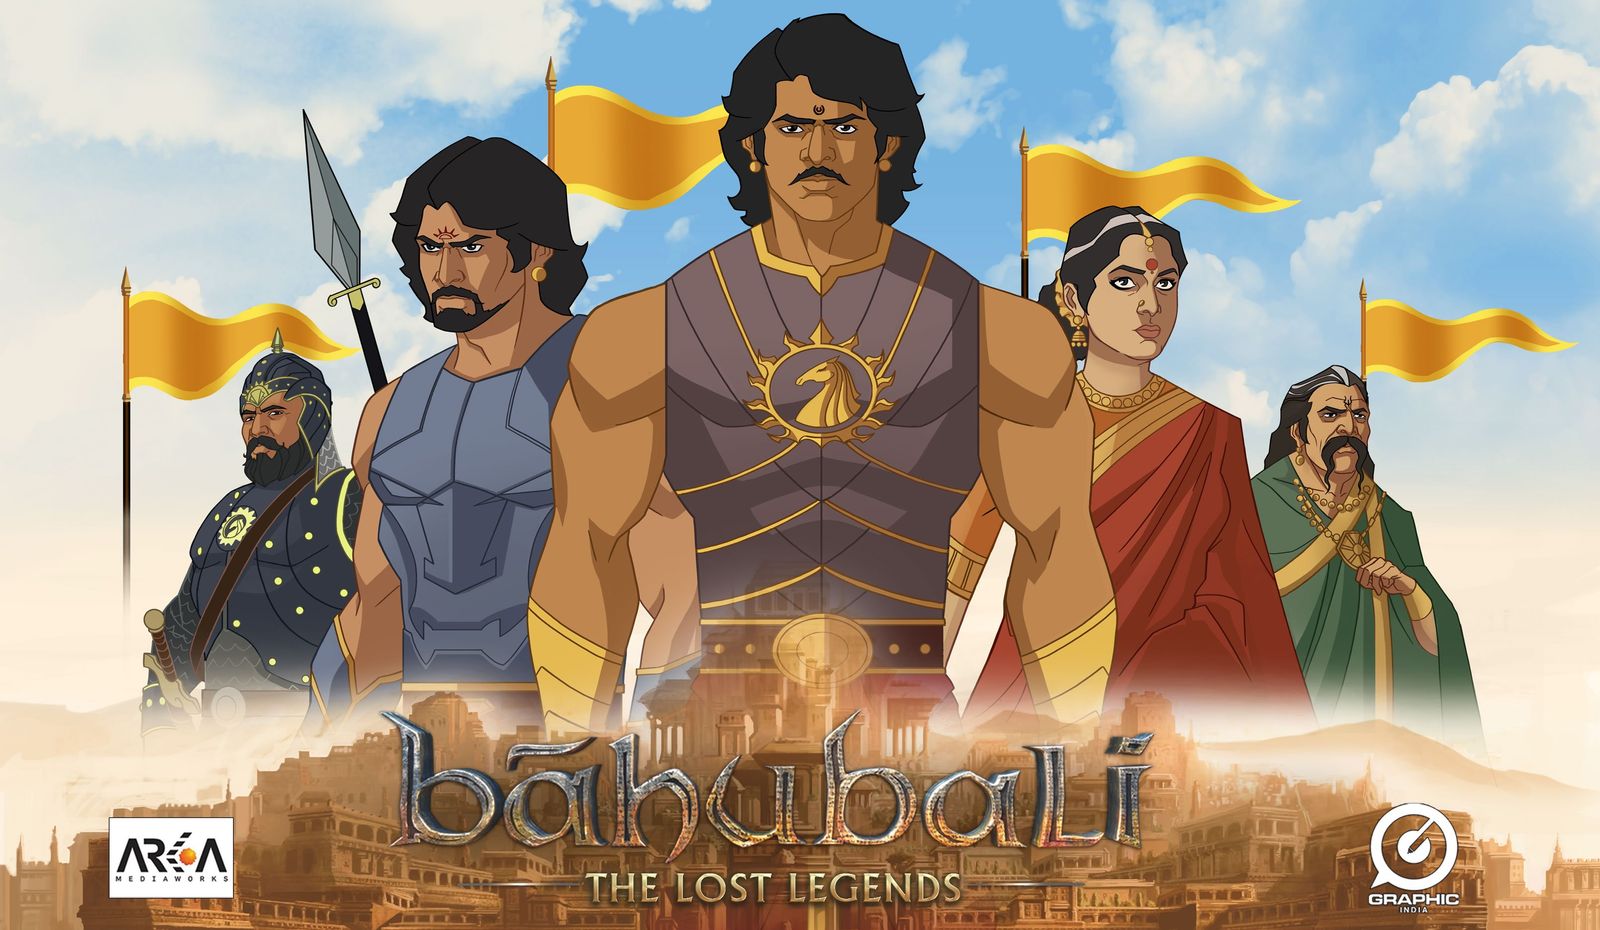 Baahubali Animated Series To Be Aired On Colors